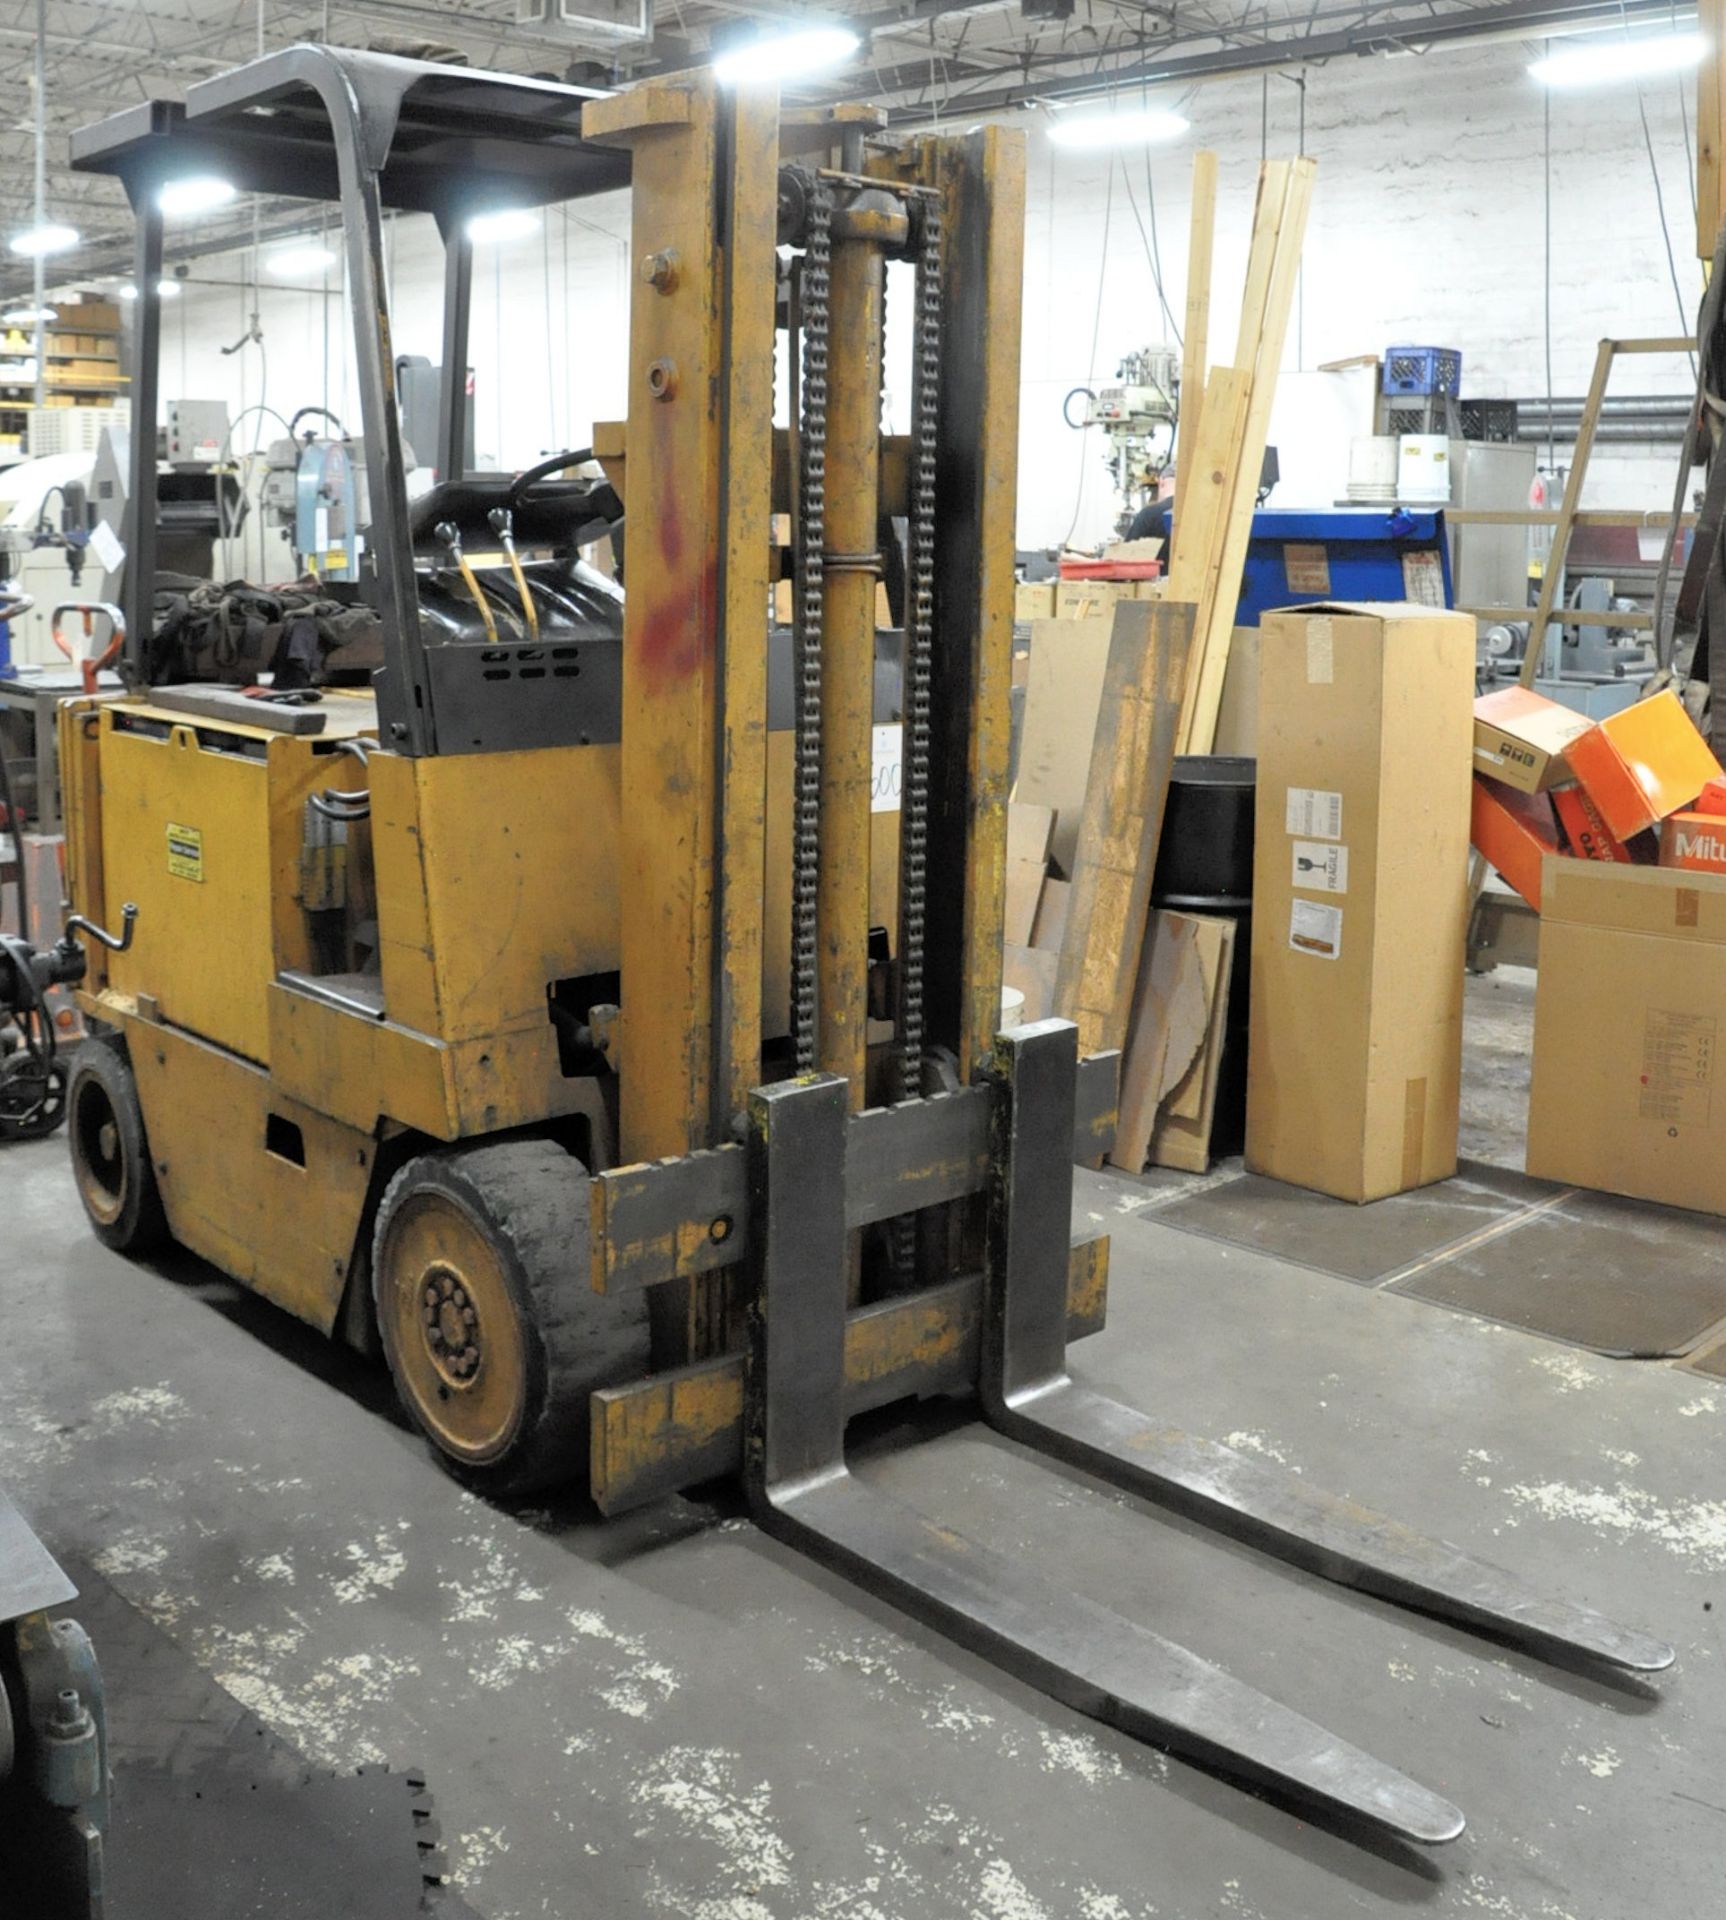 Caterpillar M60 6,000 Lb. Electric Forklift Truck. S/N 67S701 - Image 2 of 7